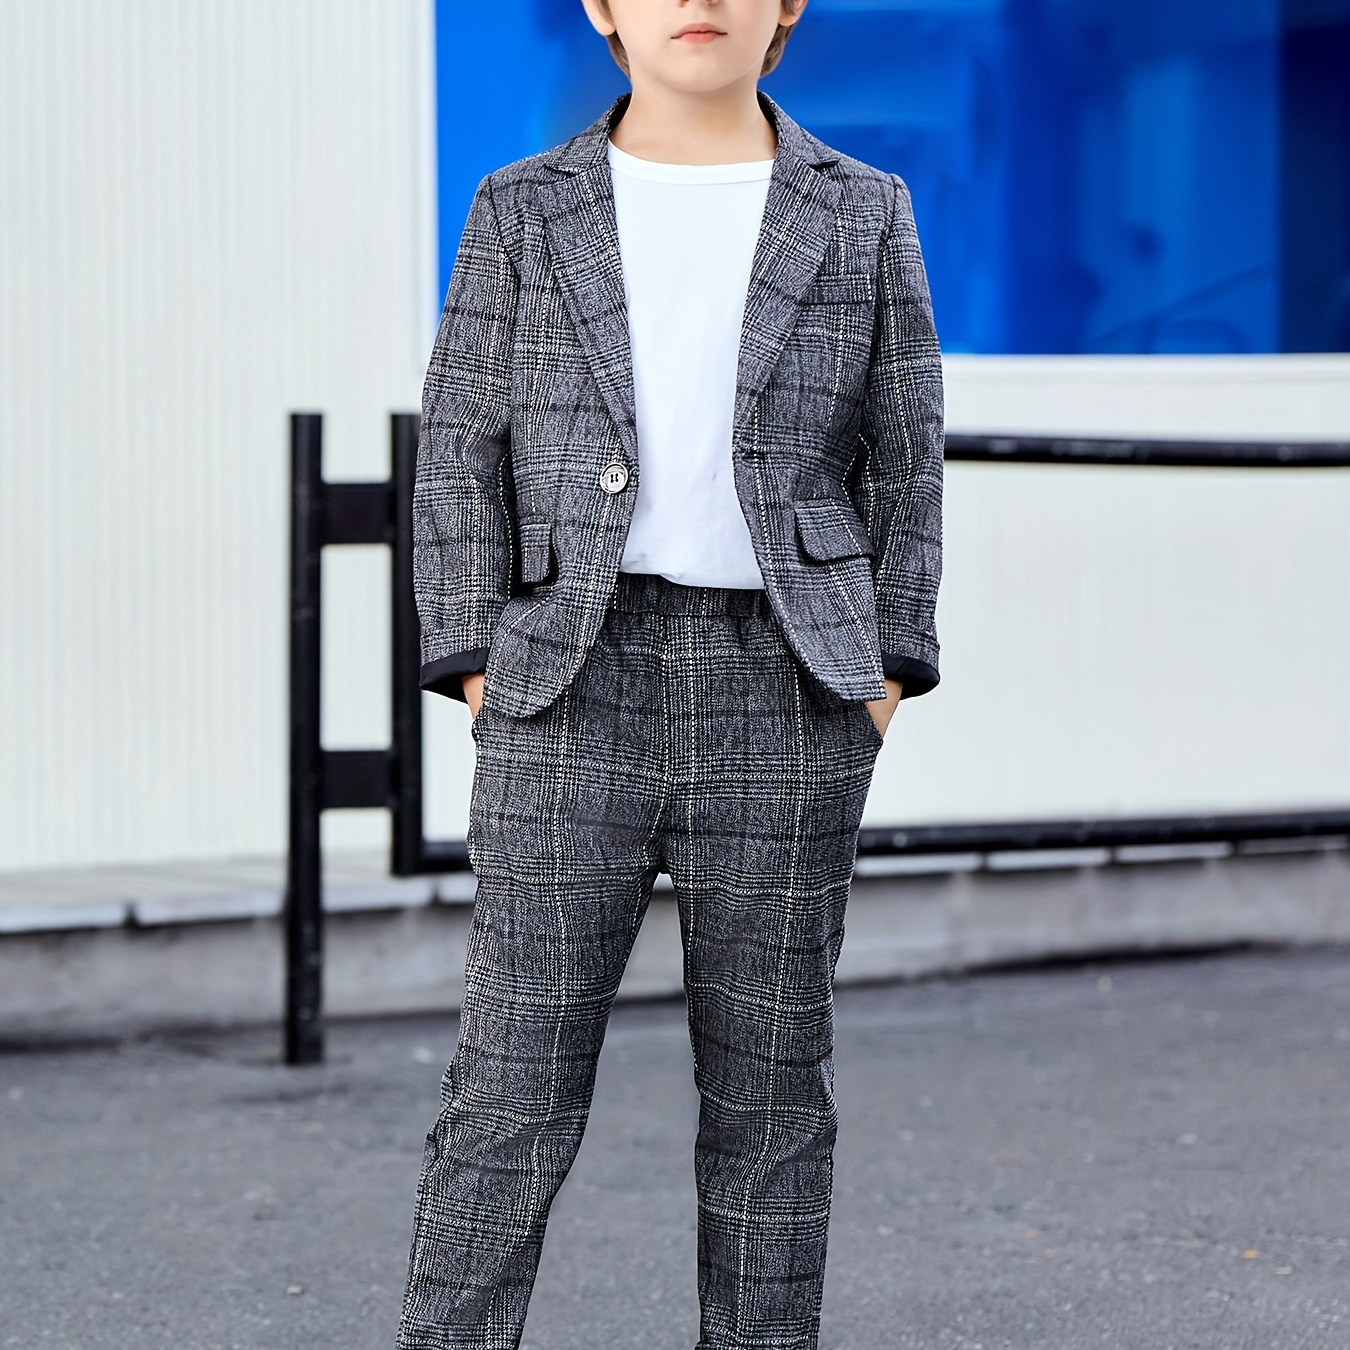 

Boys 2-piece Suit Set, Casual Plaid Blazer And Pants For Boys, Host Performance Attire, Stylish Wedding And Event Outfit For Spring/autumn